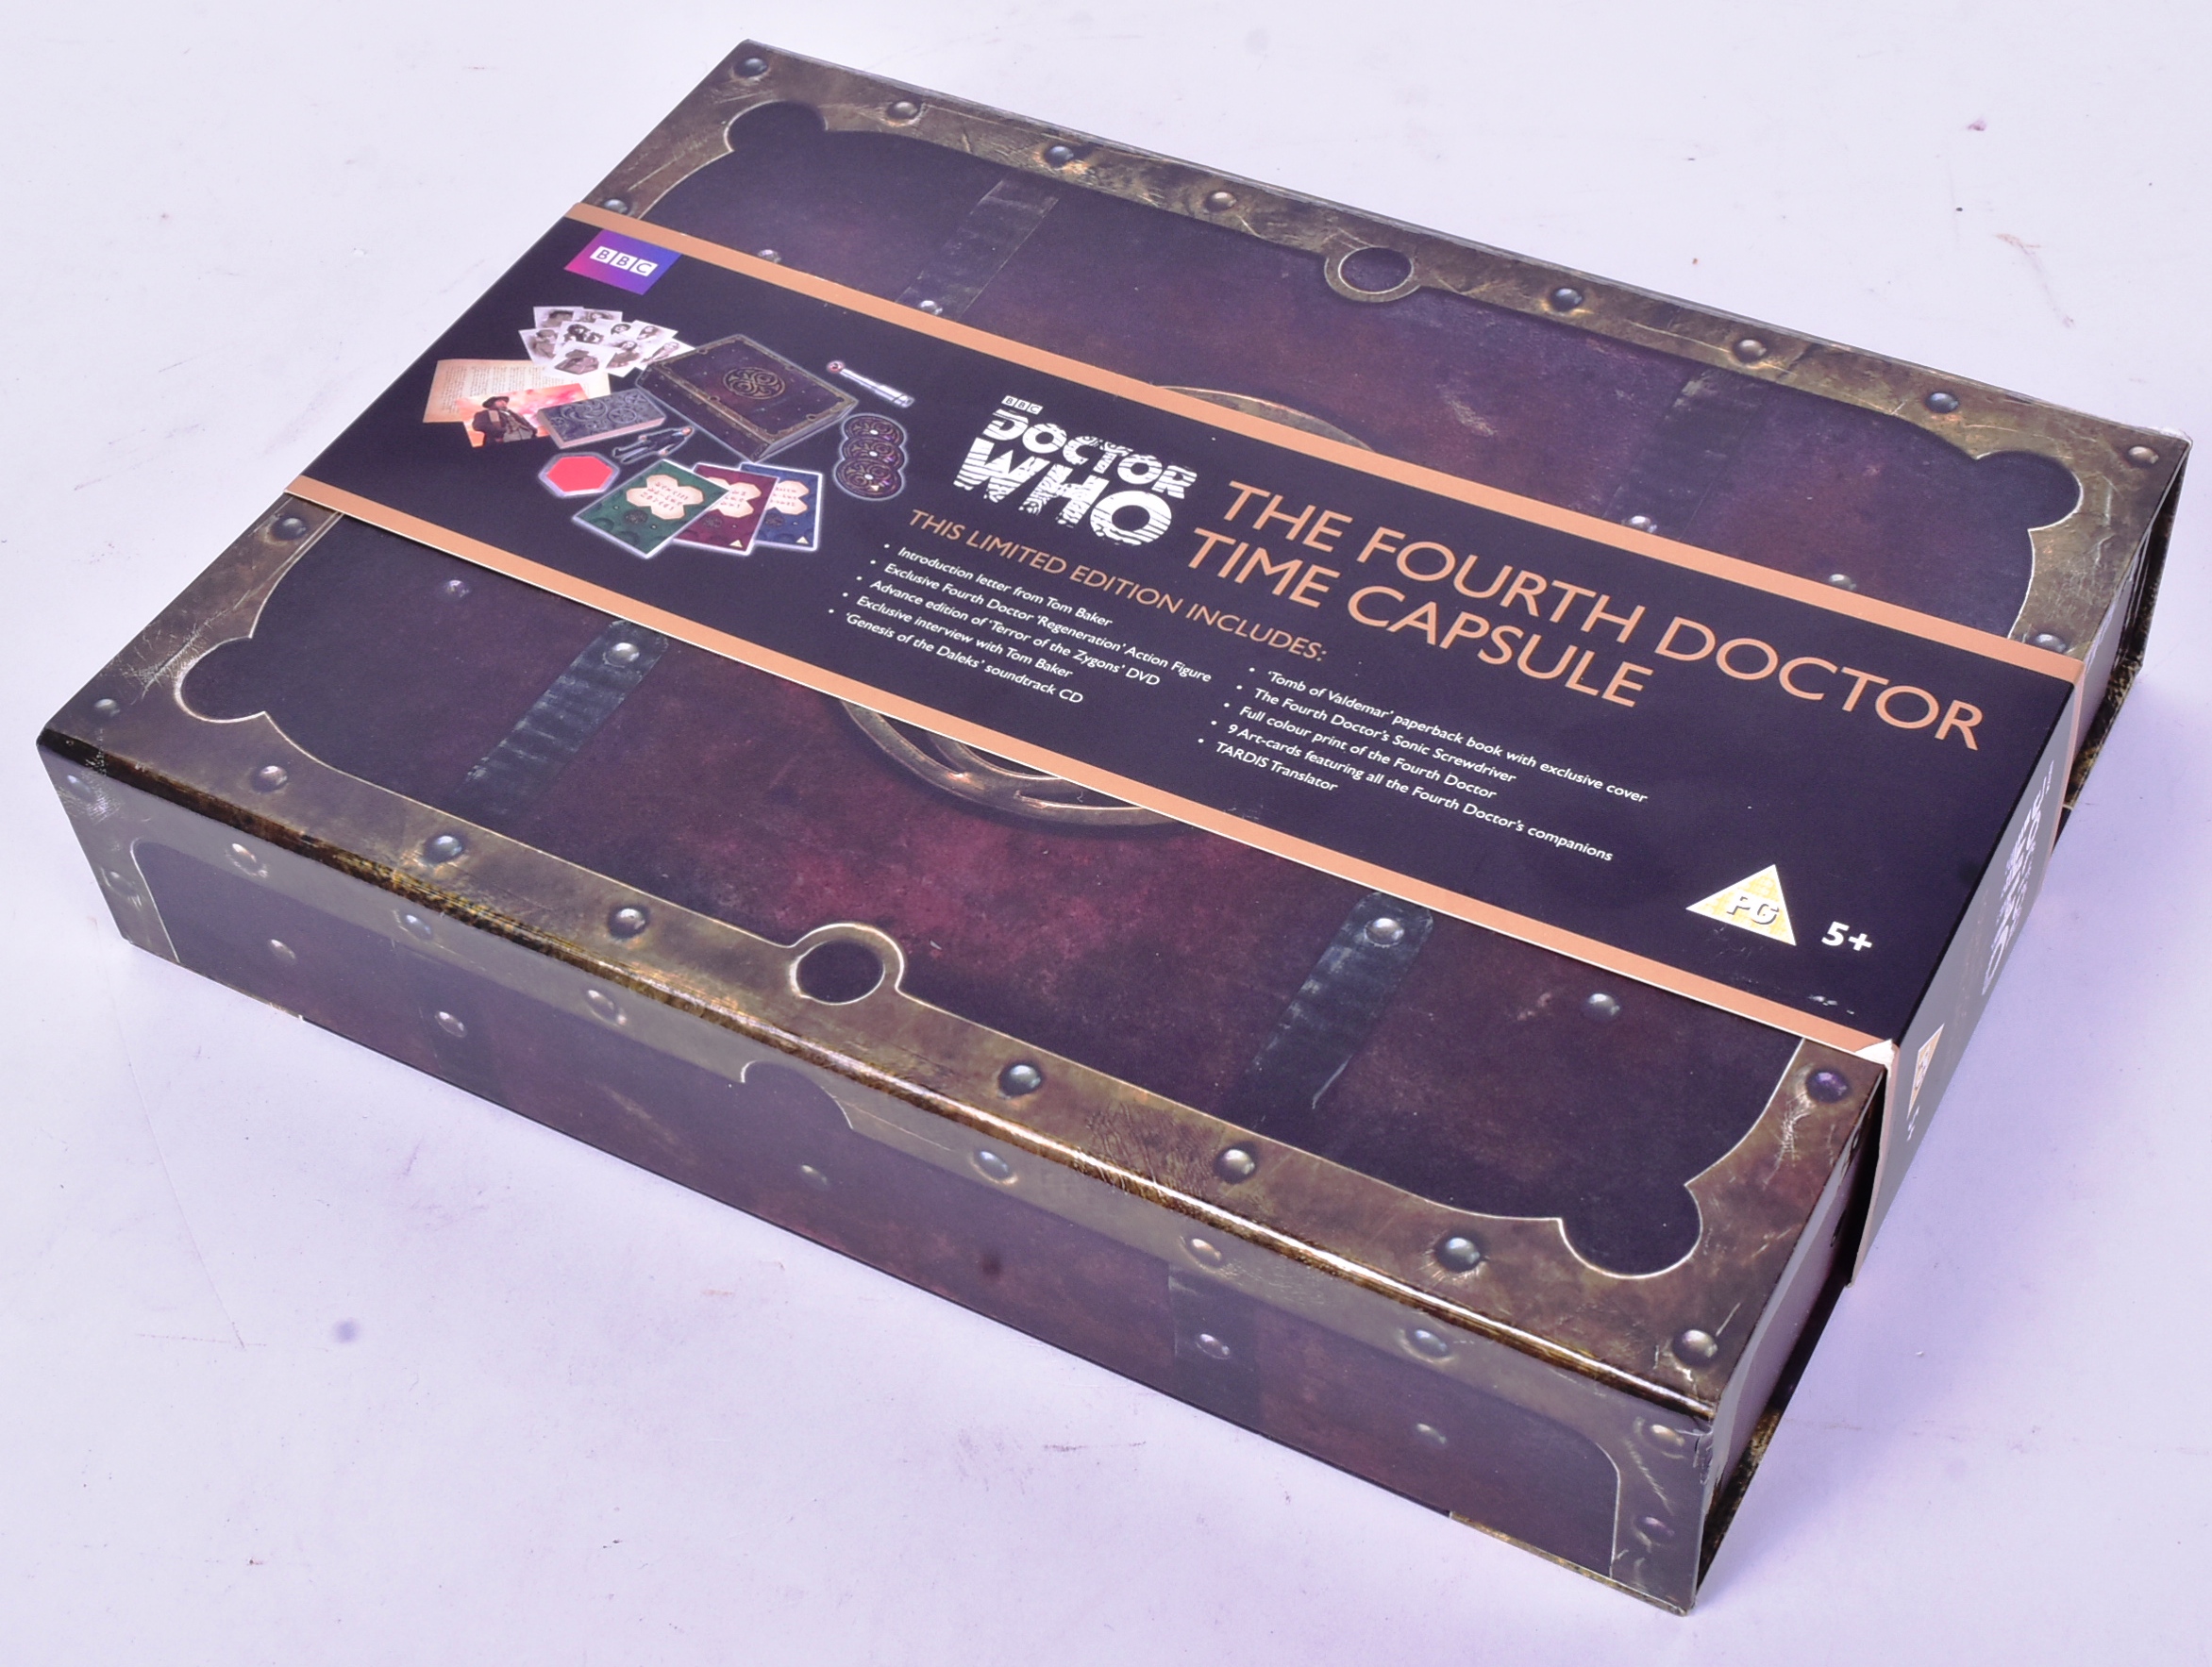 DOCTOR WHO - FOURTH DOCTOR TIME CAPSULE - BOXED SET - Image 2 of 2